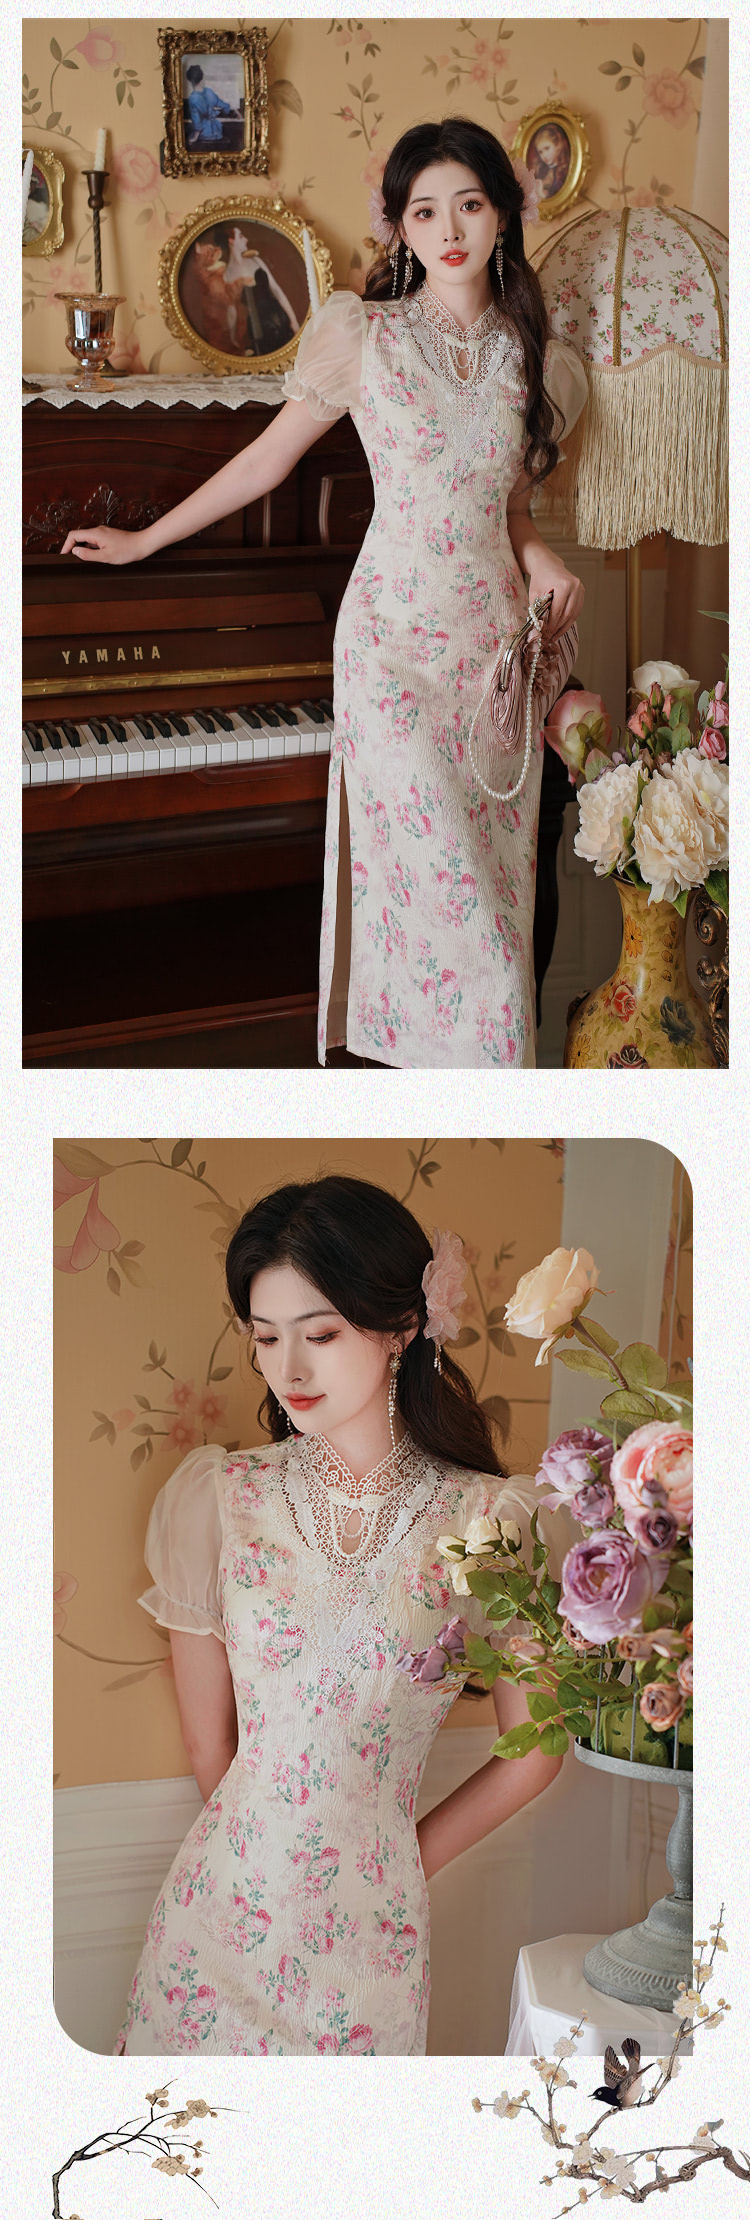 Aesthetic-Baroque-Rose-Floral-Casual-Dress-Daily-Work-Dating-Outfits12